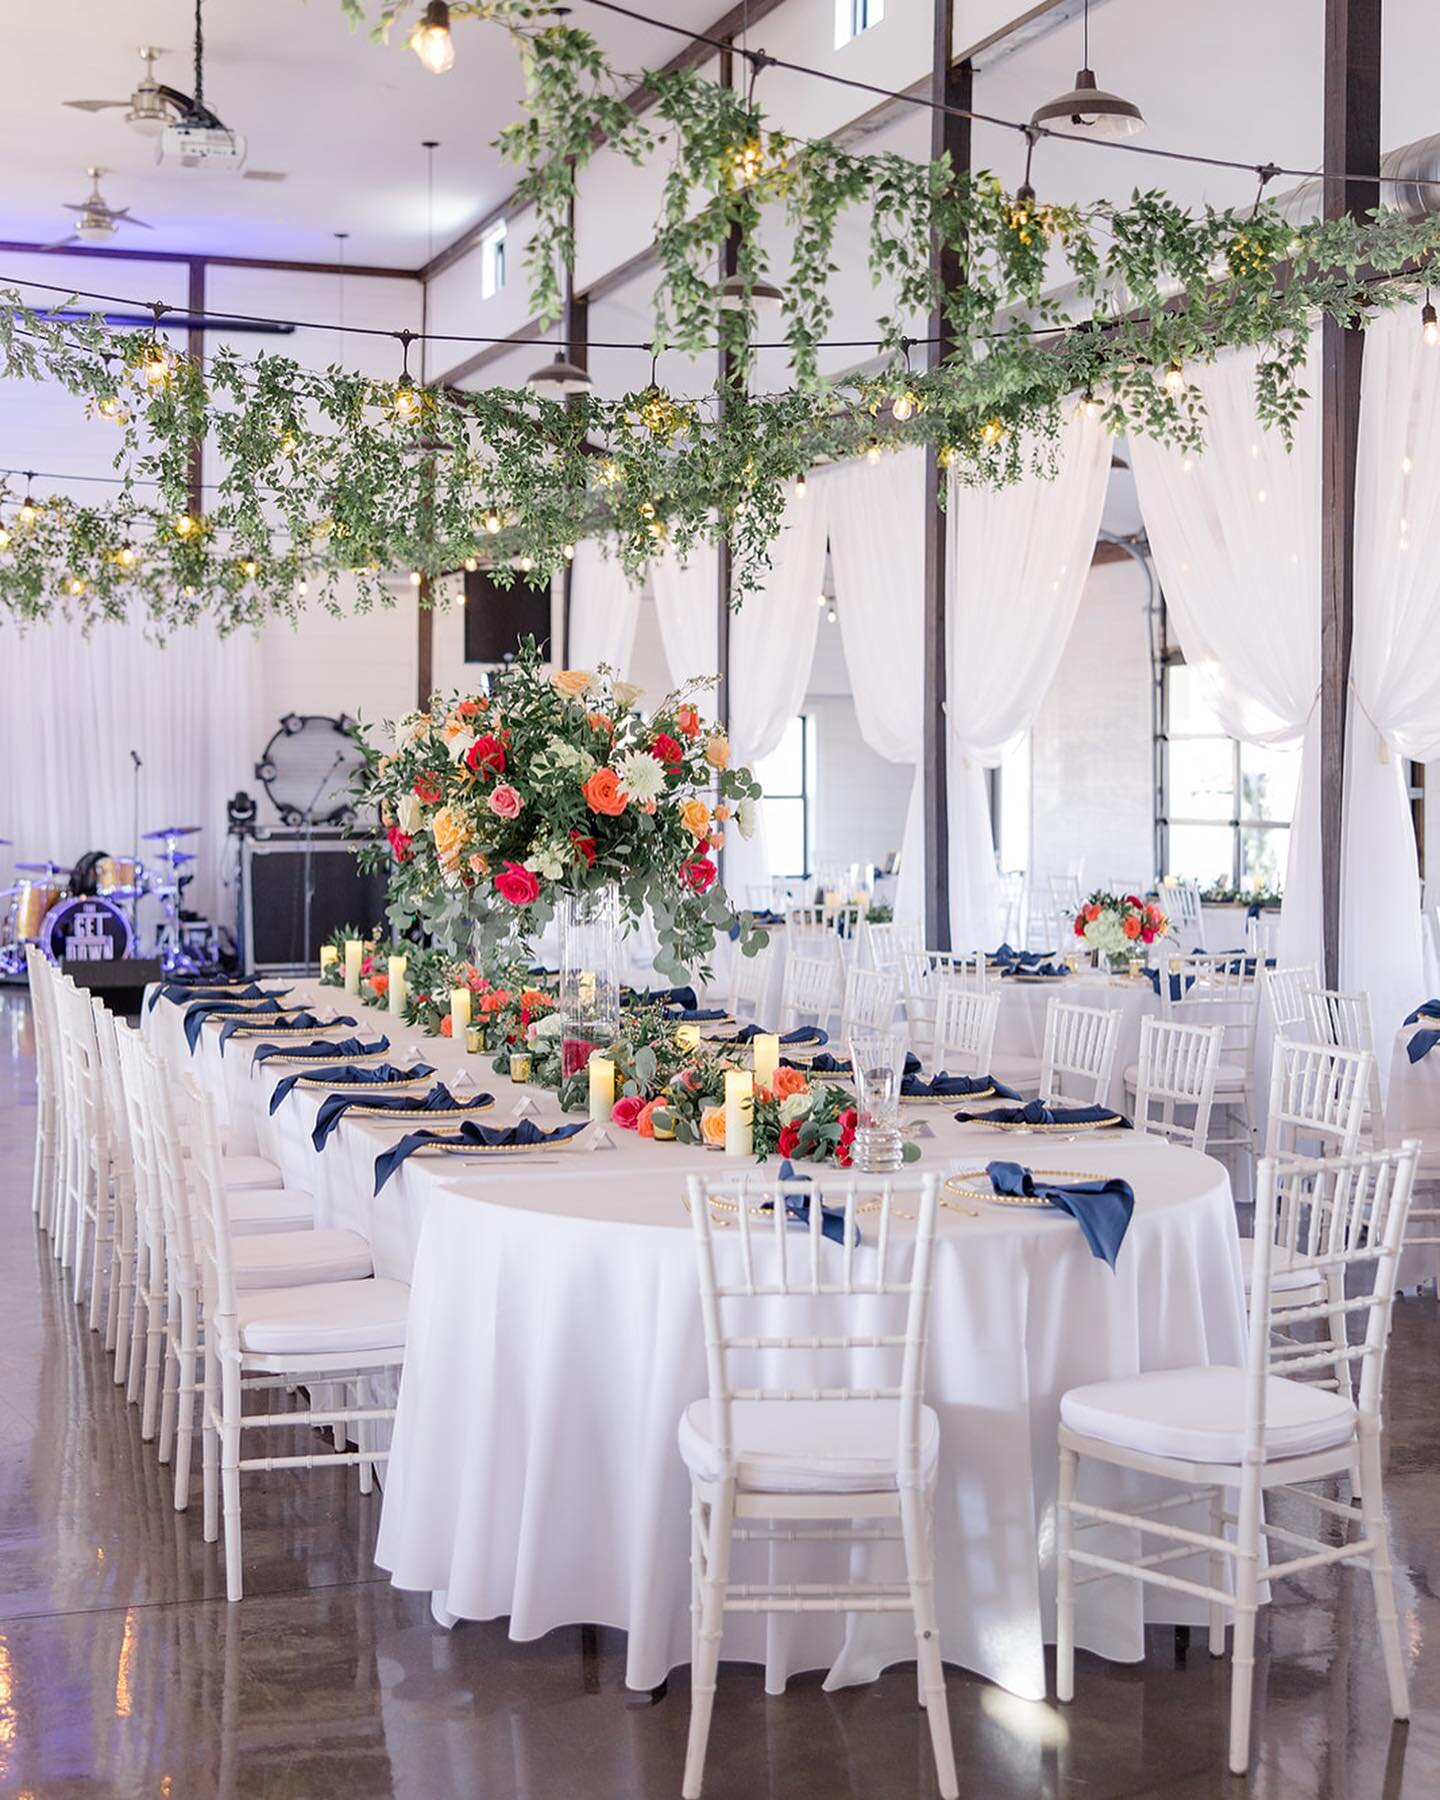 Swooning over every detail from Caitlin and Zachary's big day. The flowers, the colors, and thought into every detail were incredibly well done and executed flawlessly. We love the way this spring wedding transformed the space into an enchanted wonde